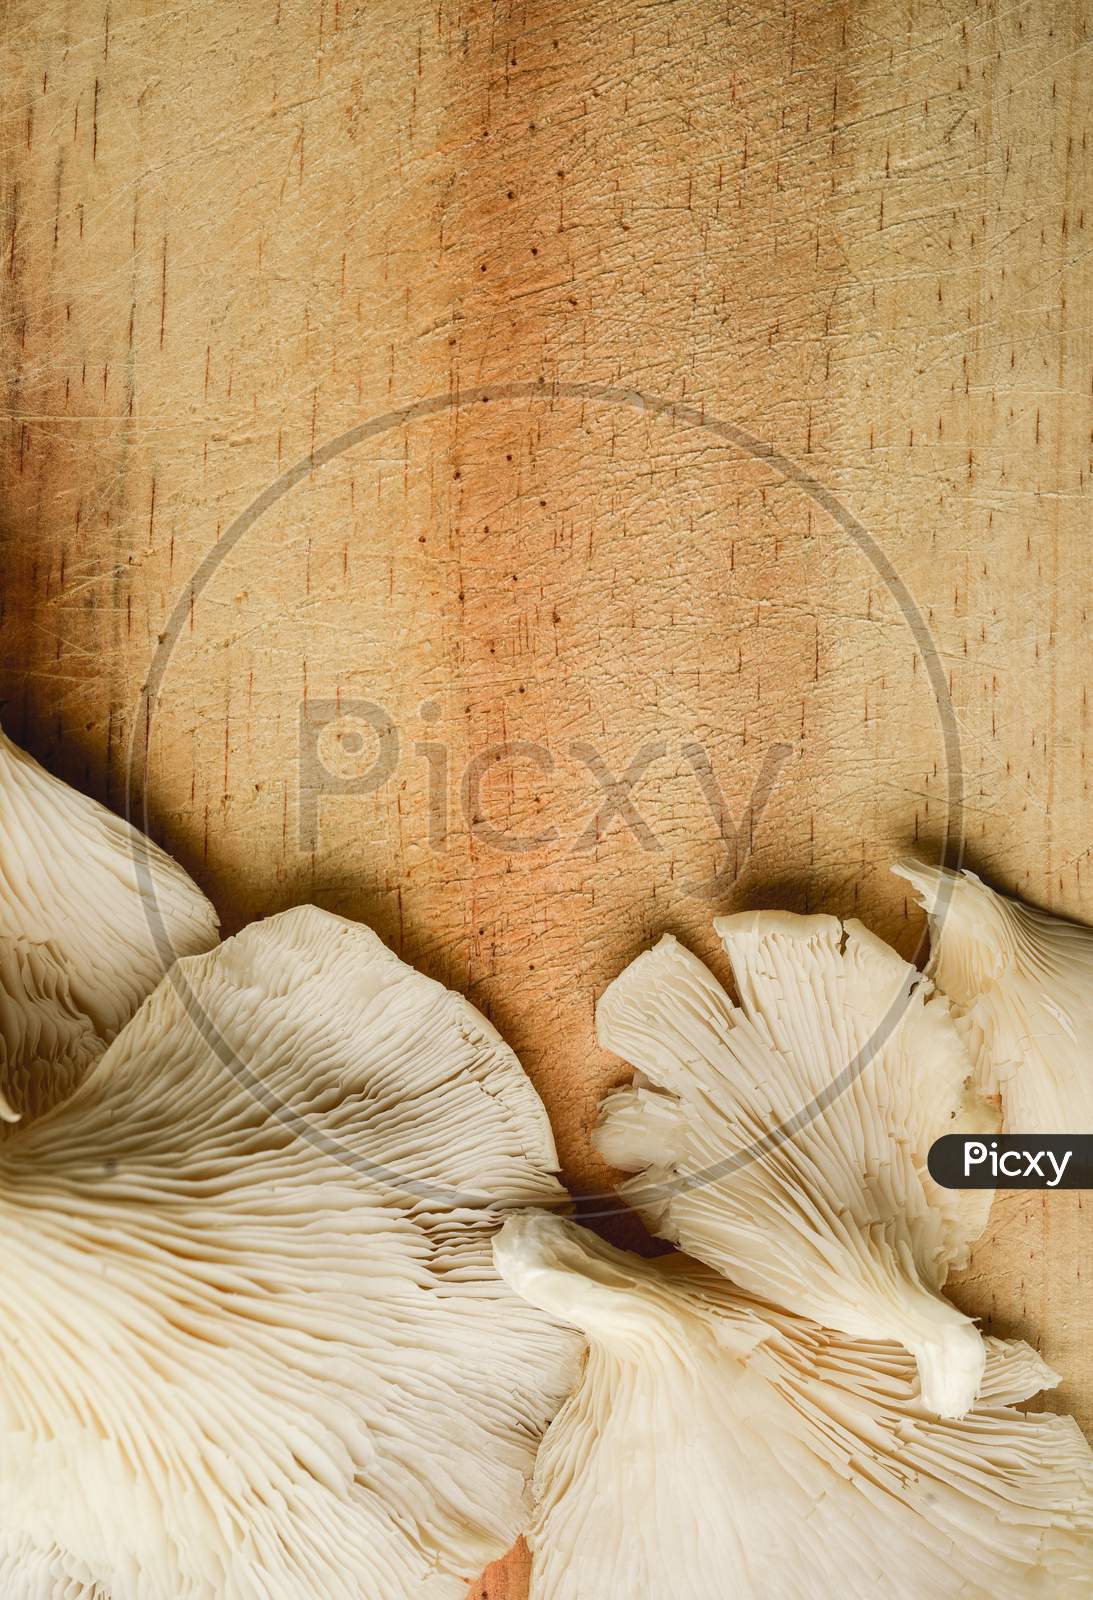 Top View Of Edible Mushrooms On A Woode Kitchen Cutting Board